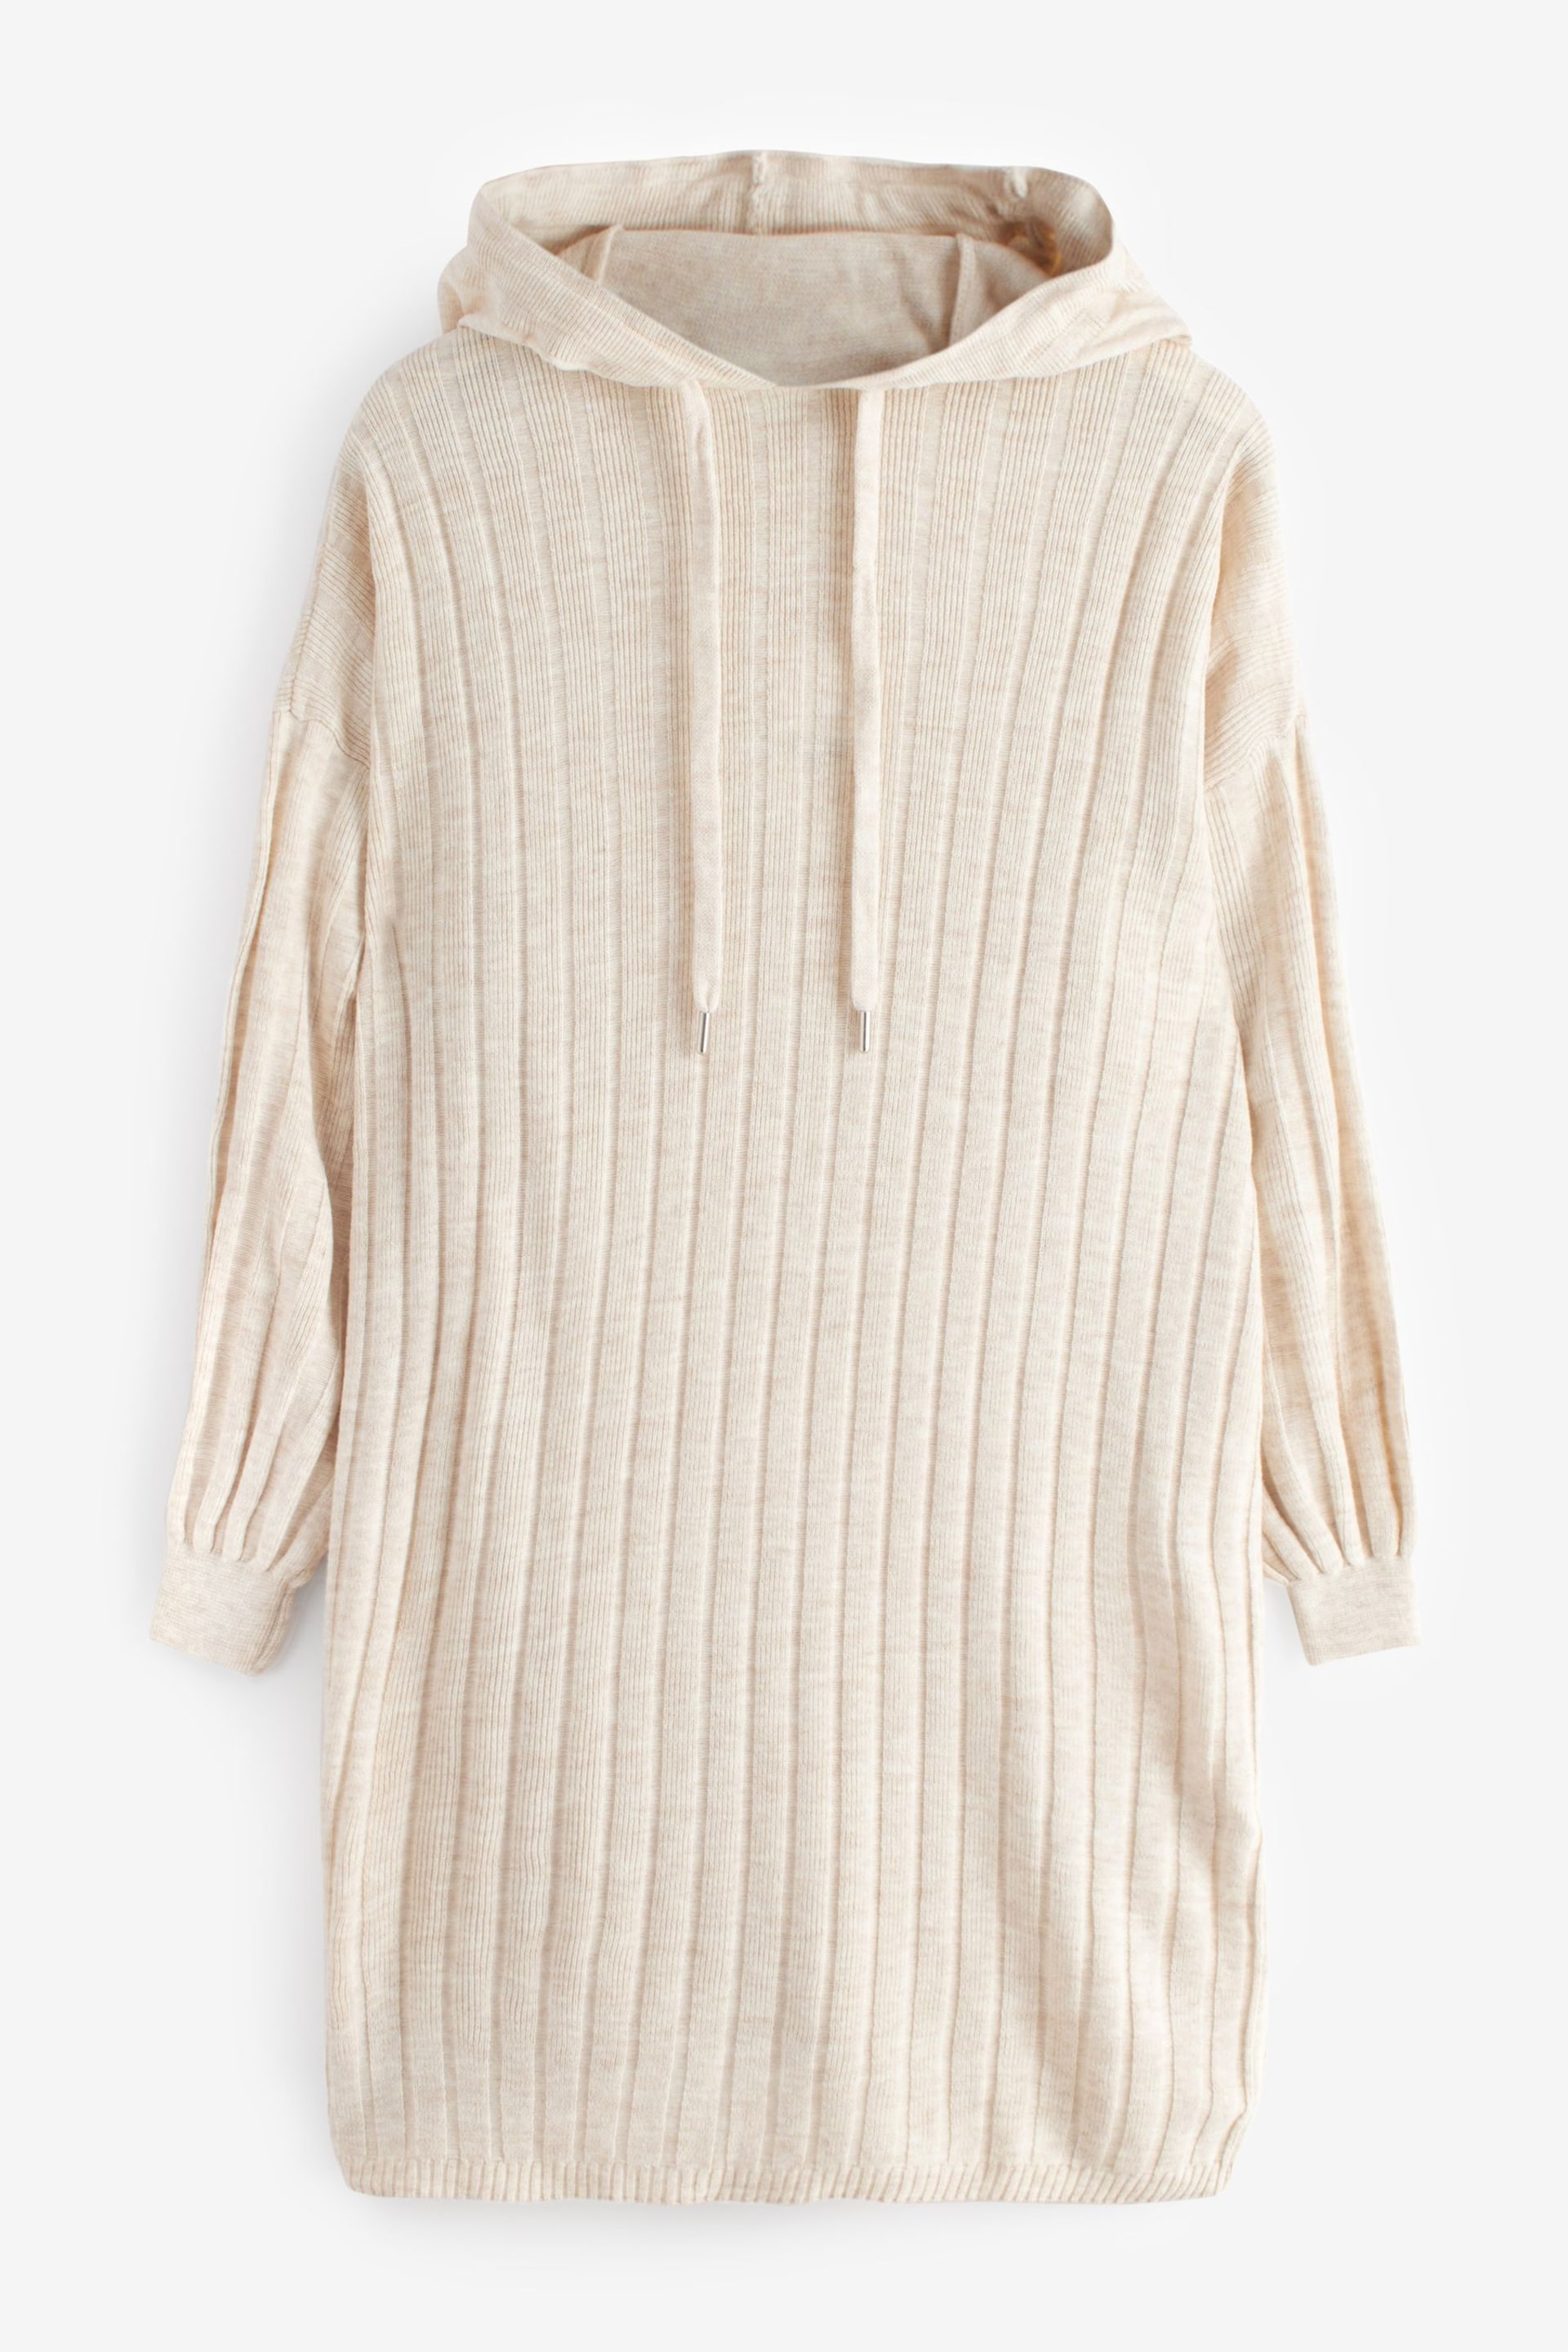 ONLY Cream Knitted Hooded Cosy Lounge Jumper Dress - Image 5 of 6